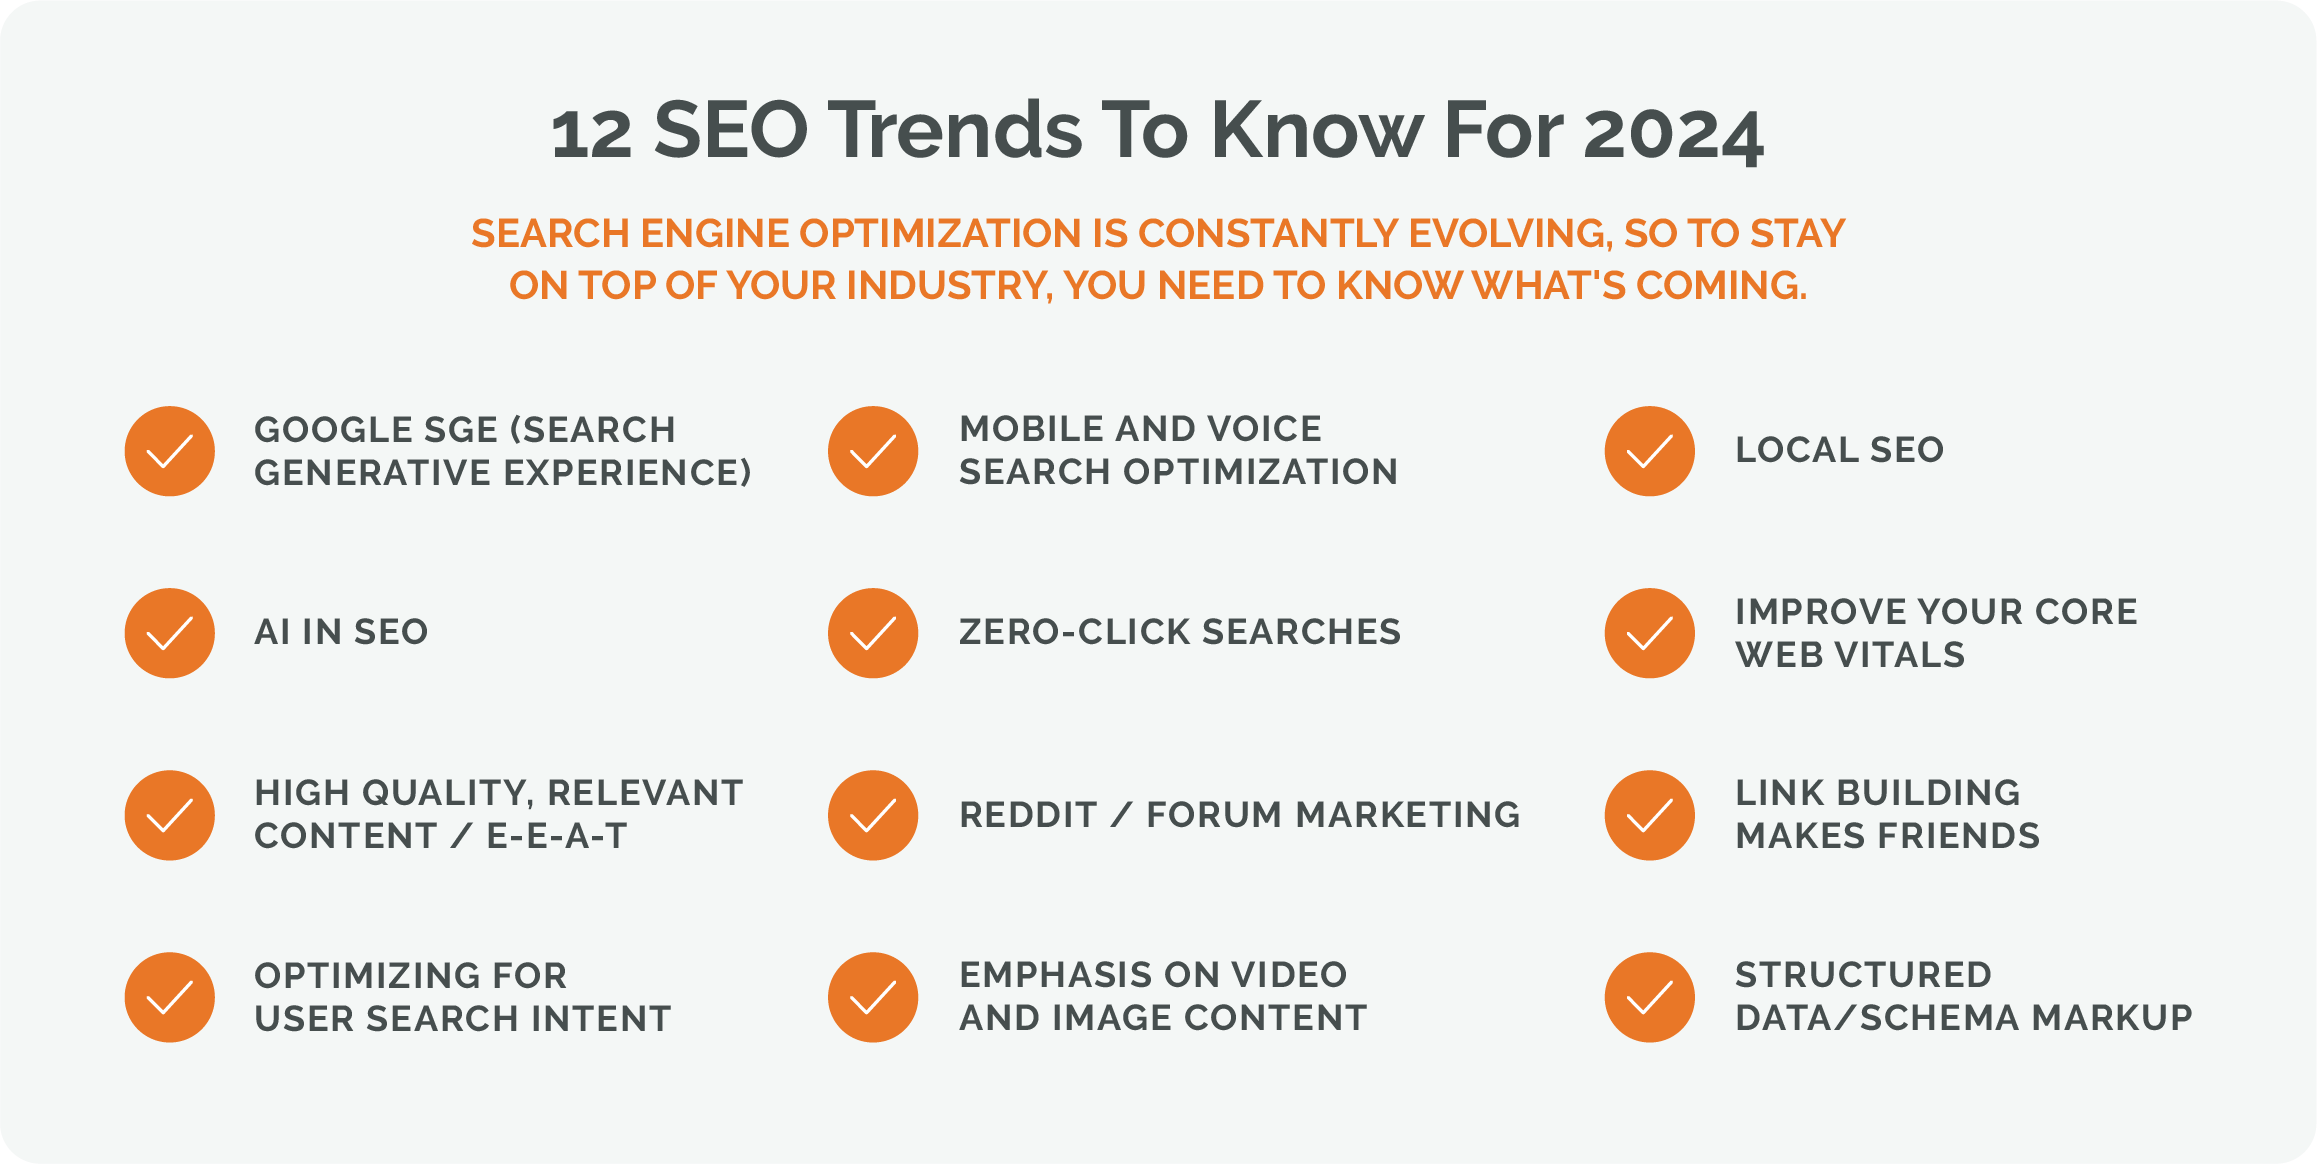 seo trends for 2024